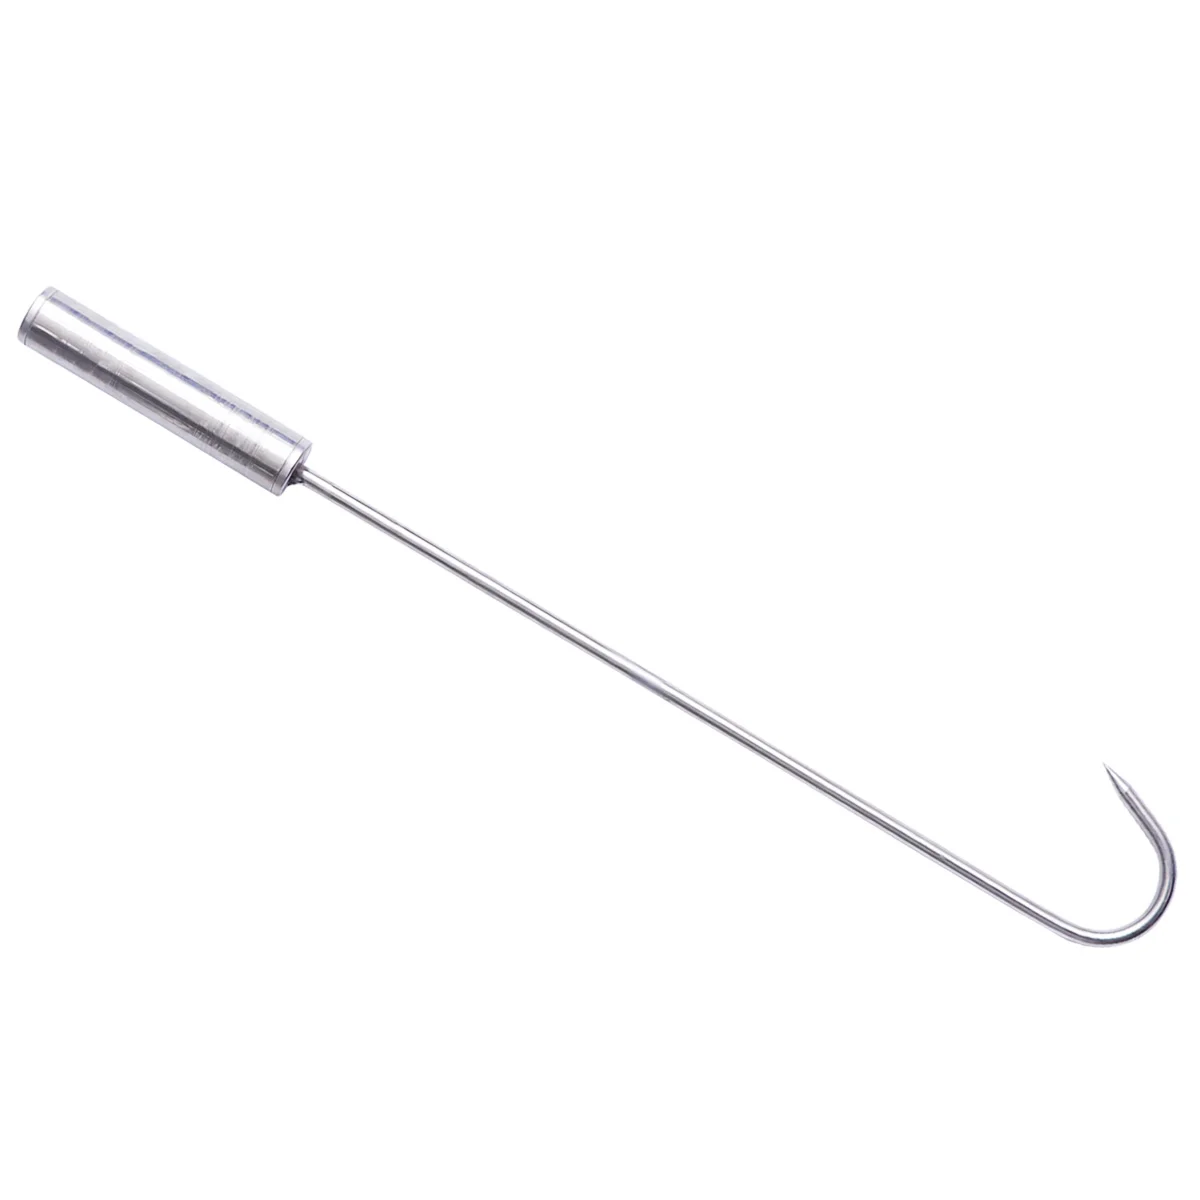 

Stainless Steel Meat Hook Cooking Roasted Barbecue Pin for Barbecue Steak Sausage Ribs Chicken Grilled Bacon Vegetables (Steel